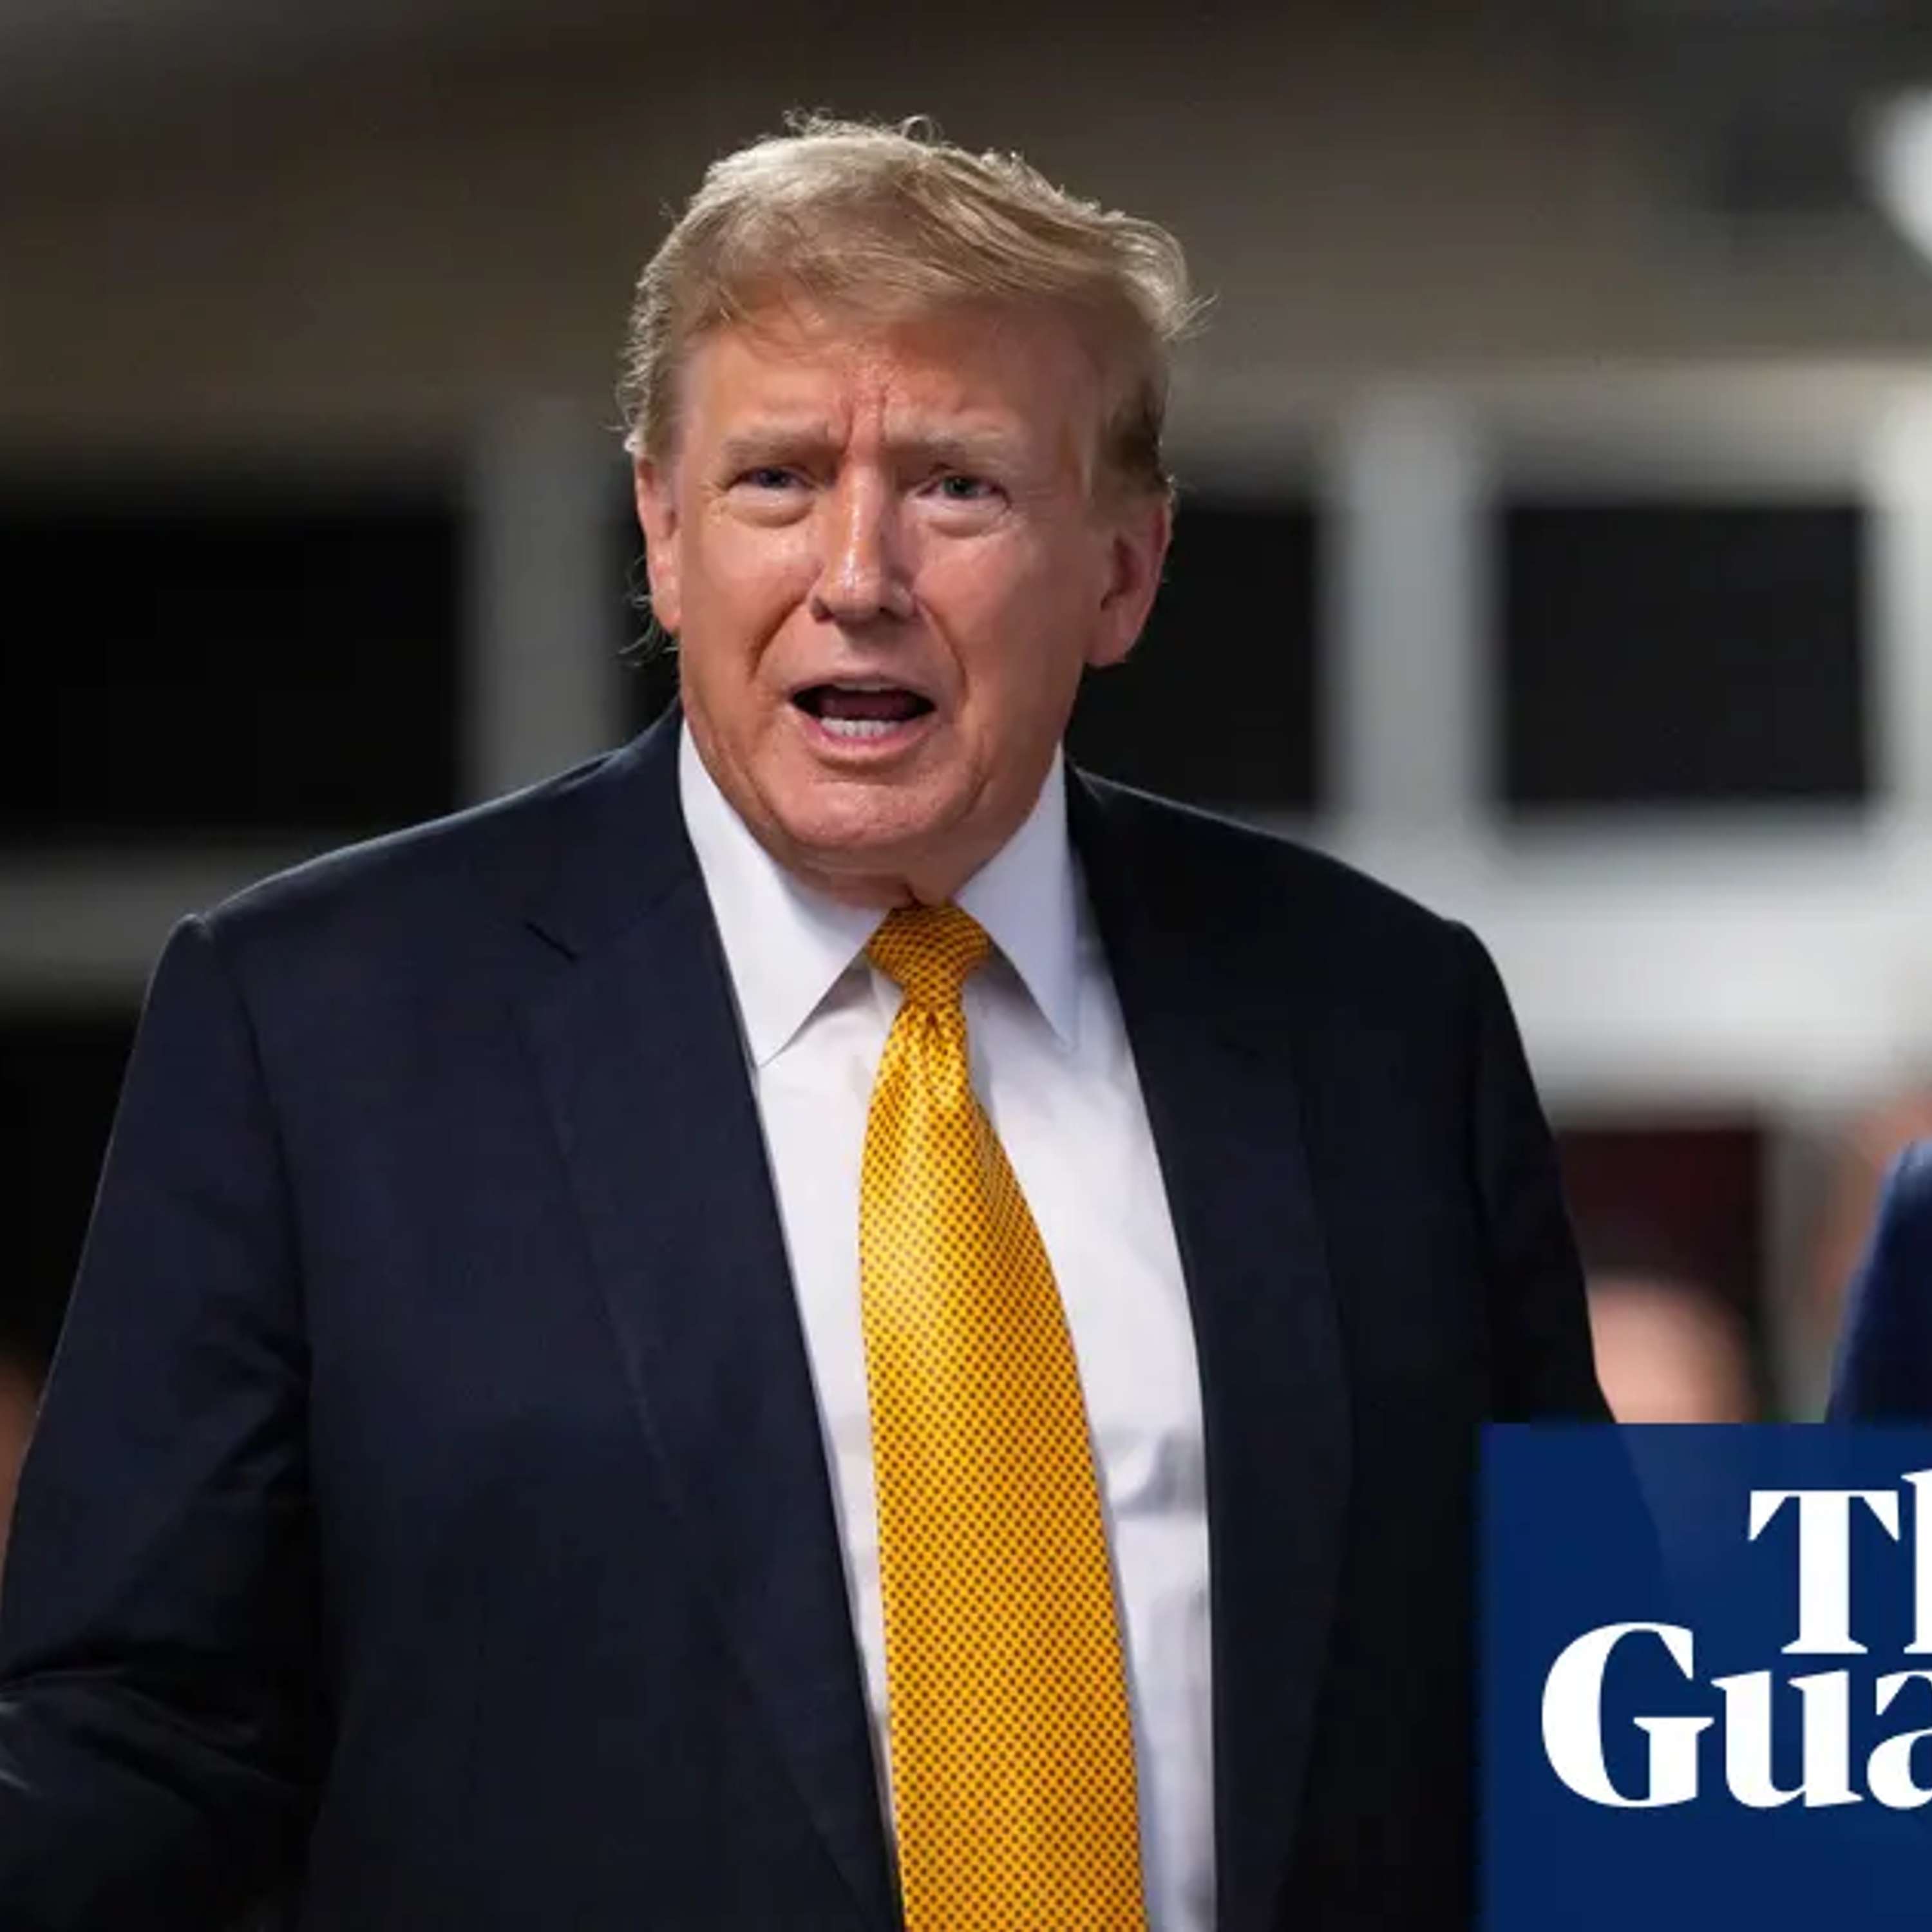 Trump's Legal Woes Deepen, Trump Ignites Contraception Debate, Naples Best US City, Top Secret Spy Satellites Launched, and more...